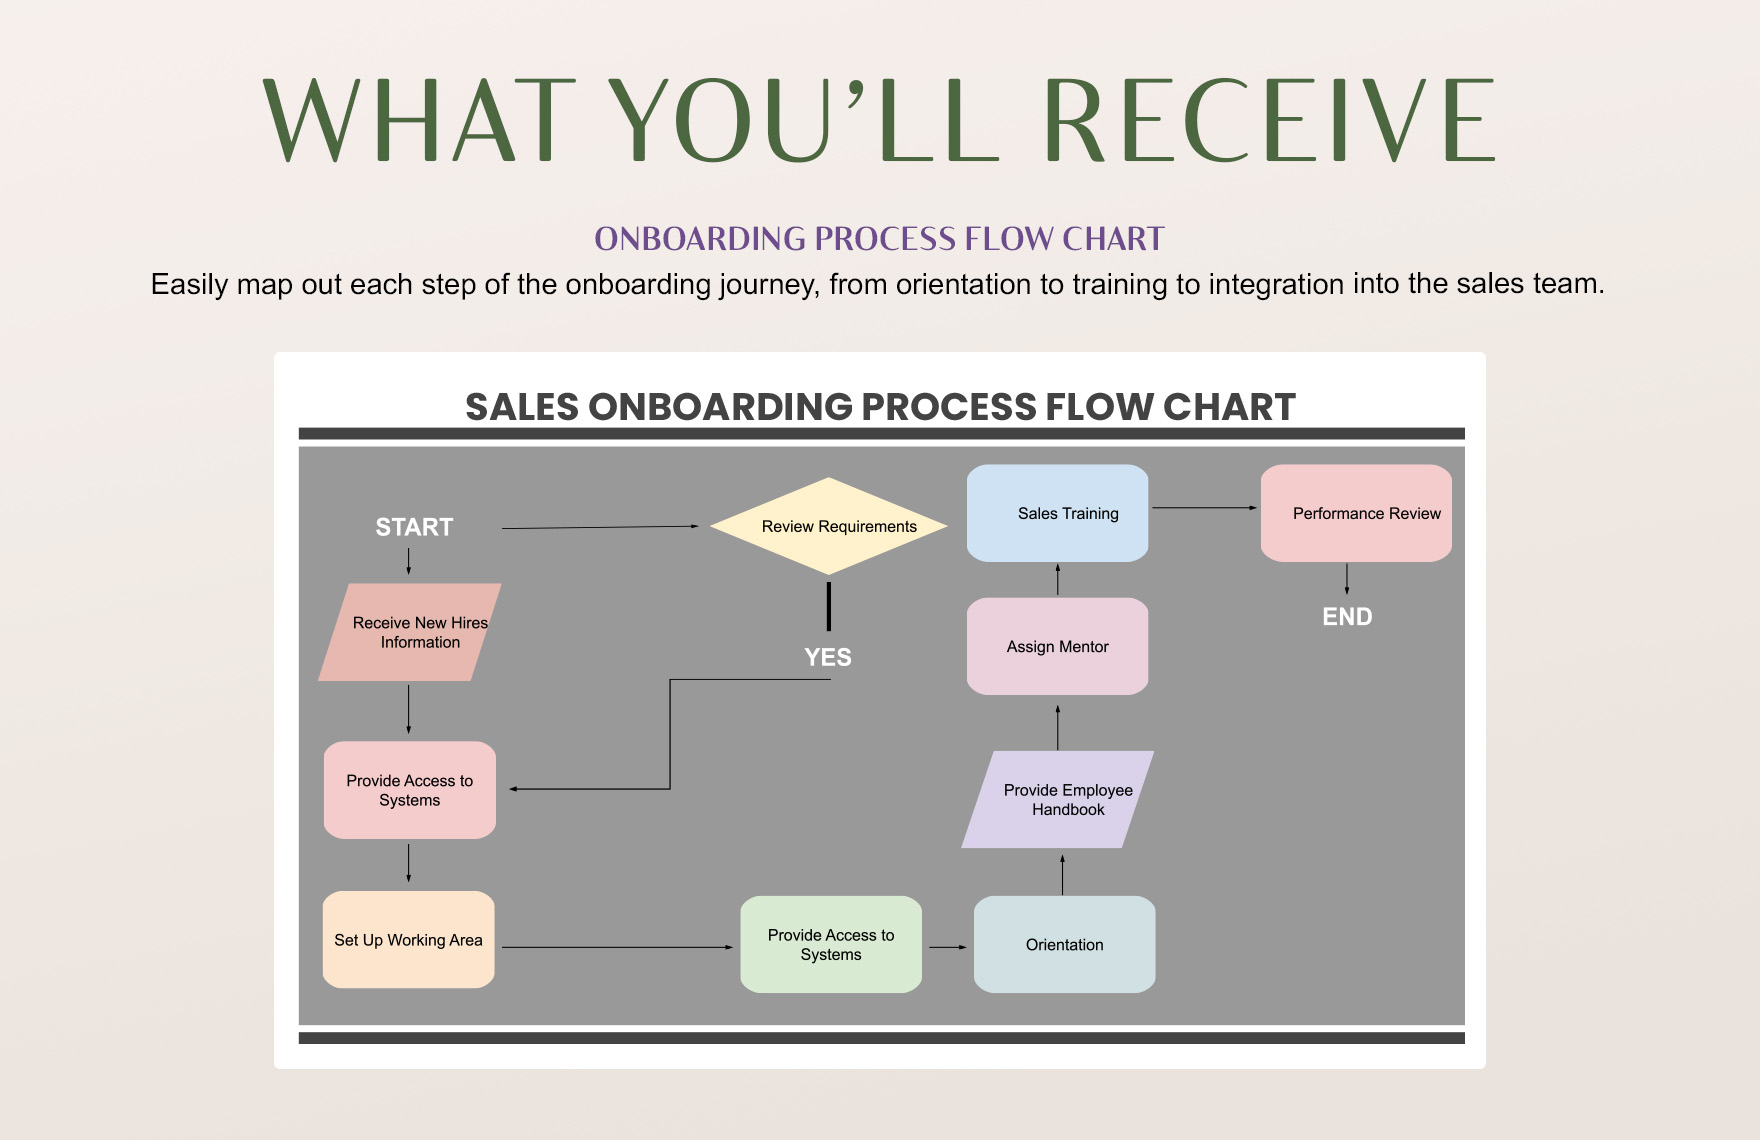 Sales Onboarding Process Flow Chart Template